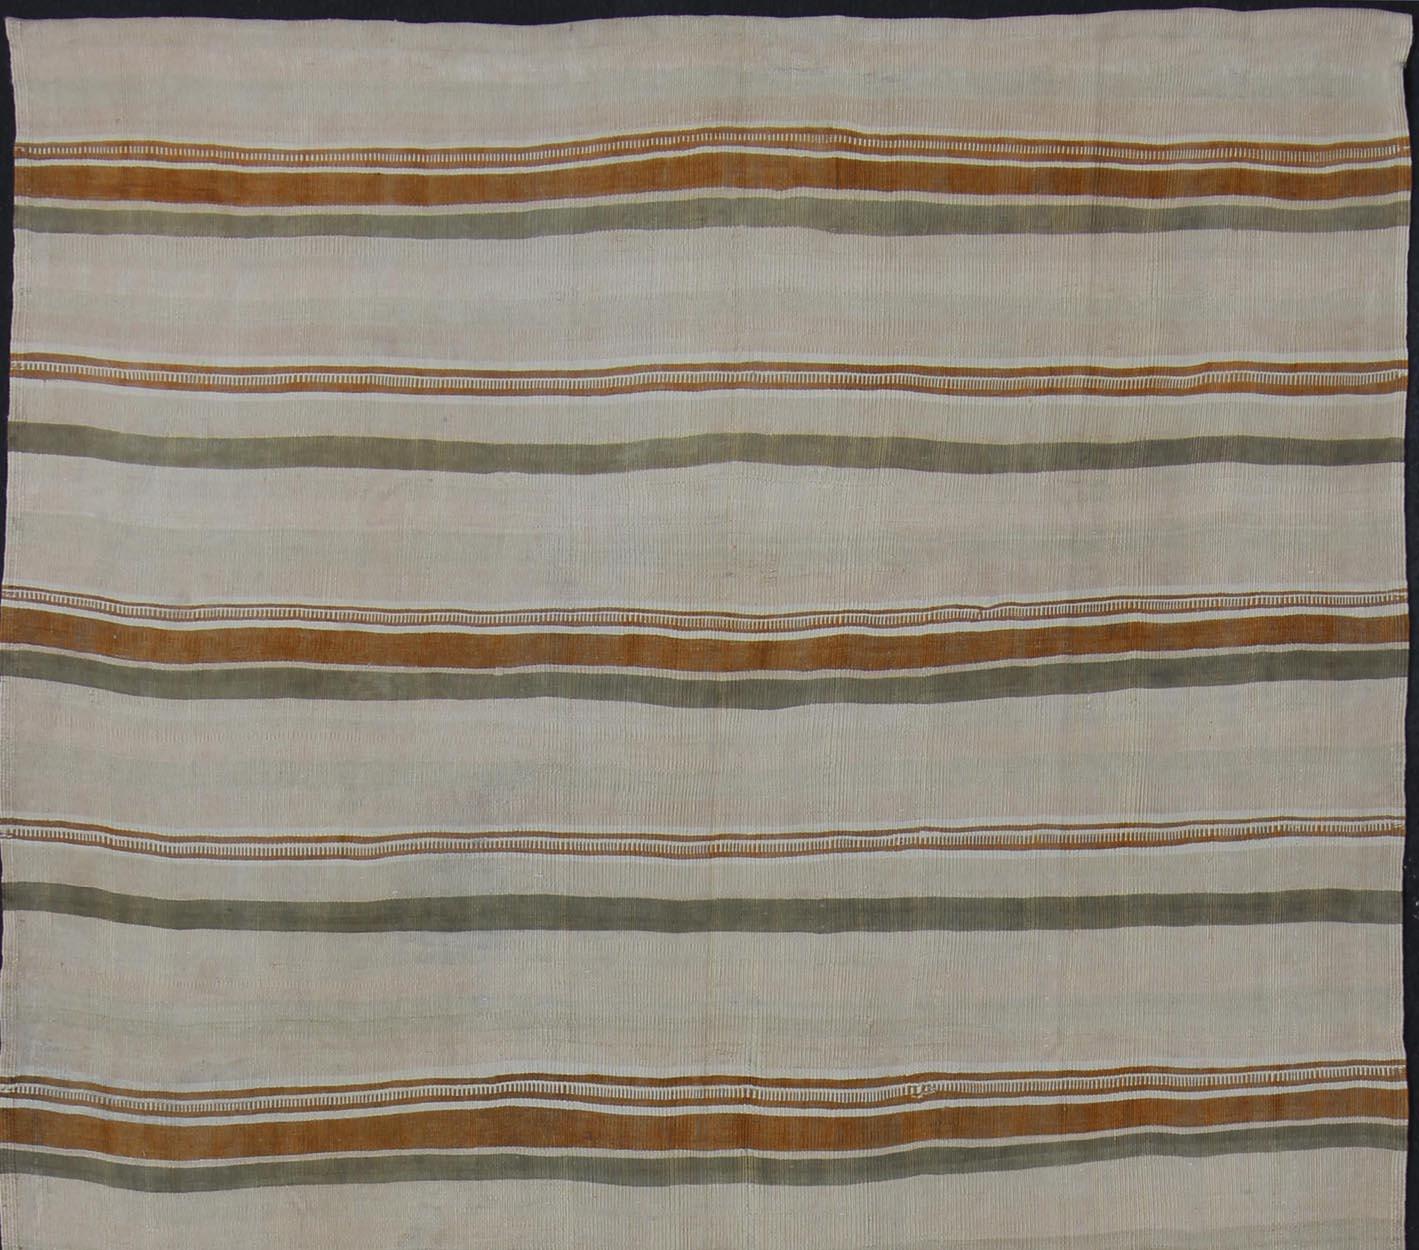 Hand-Woven Large Kilim Vintage Runner with Green-Gray and Orange in Stripe Design For Sale